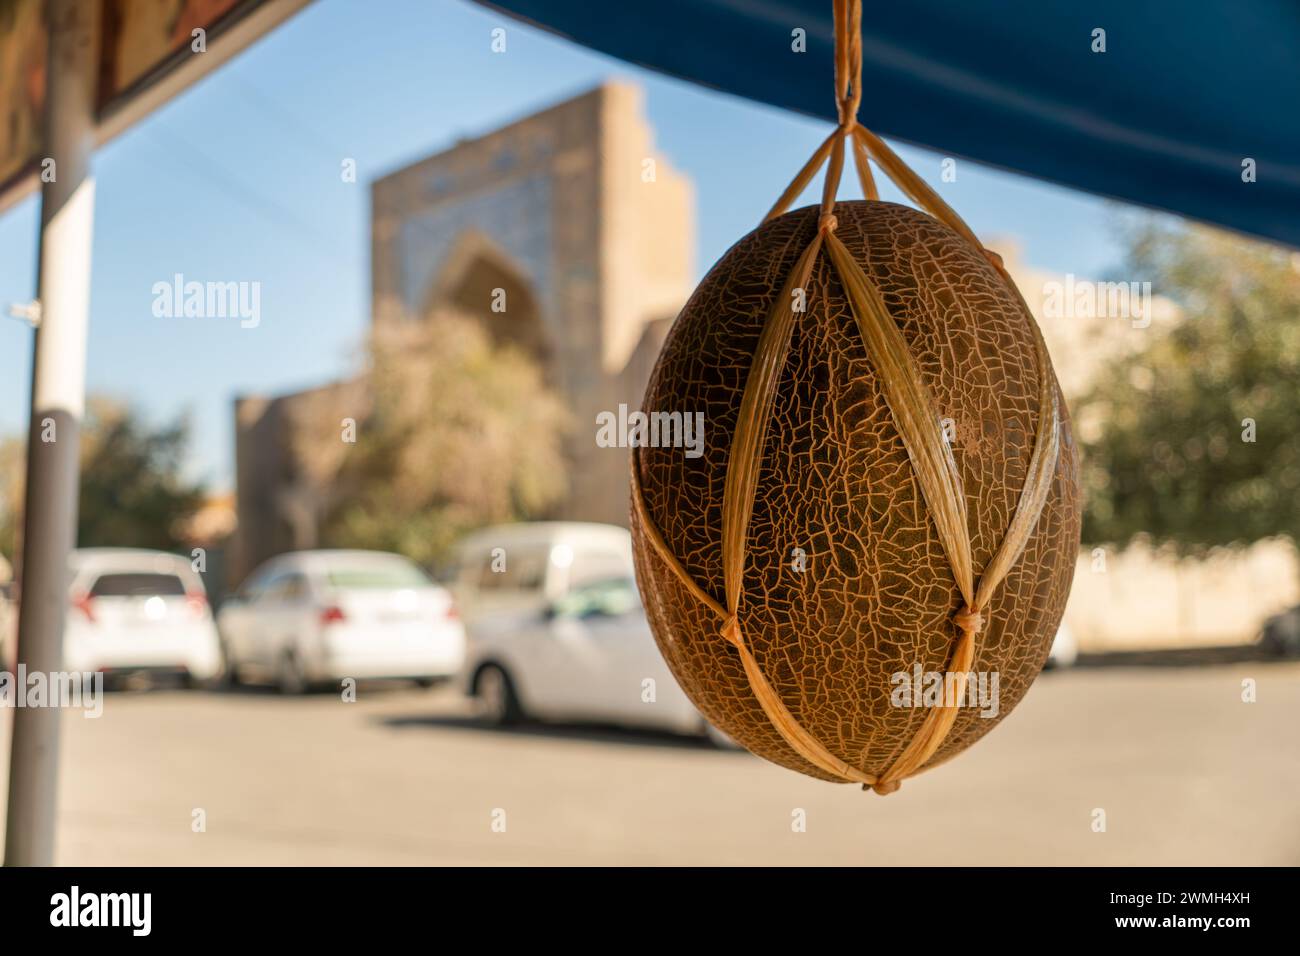 A ripe orange melon hangs on a rope against the background of a beautiful madrasah Stock Photo